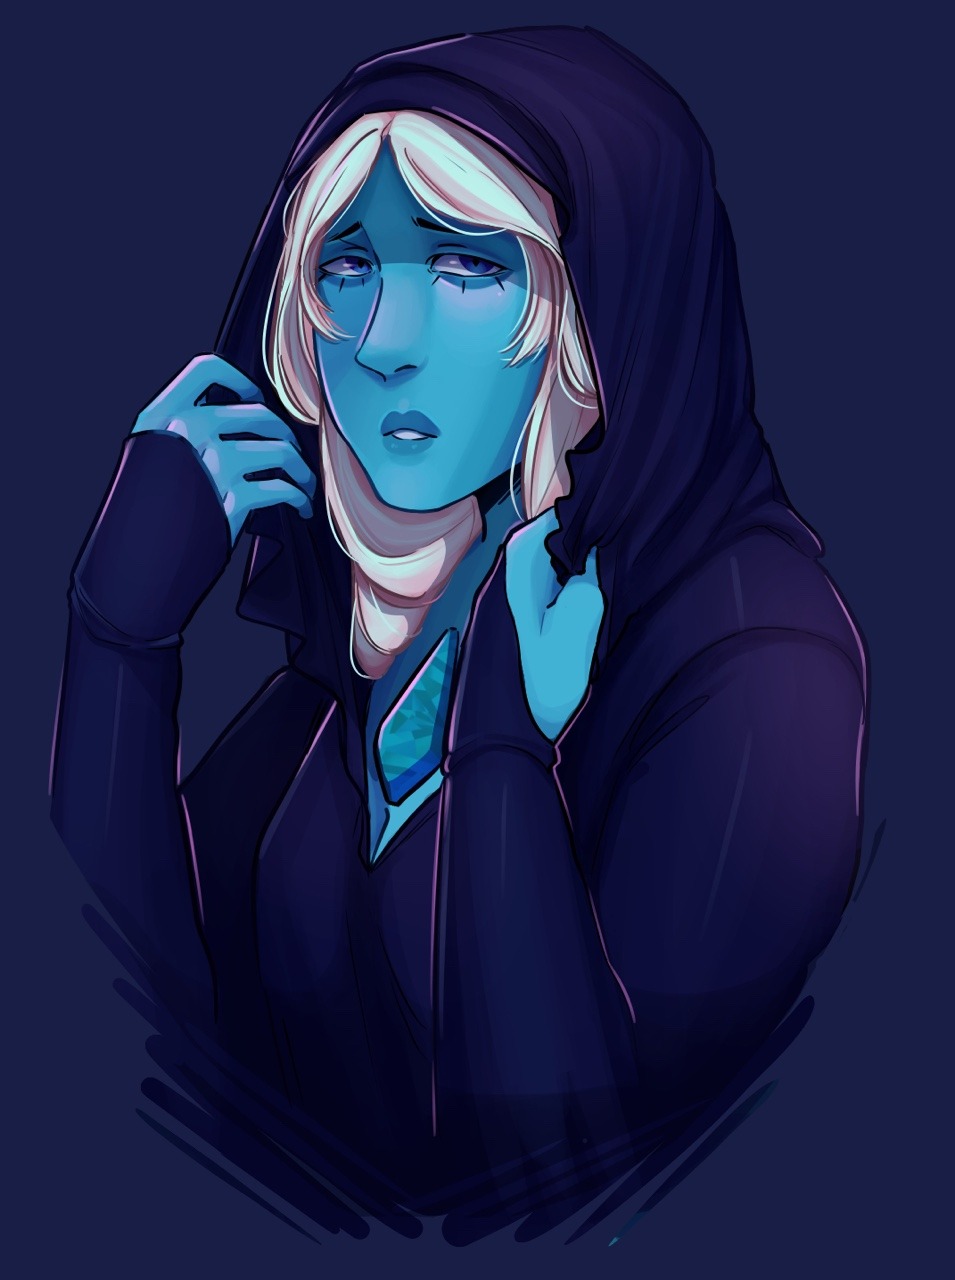 Blue Dimond for an art trade with the amazing @artandash!